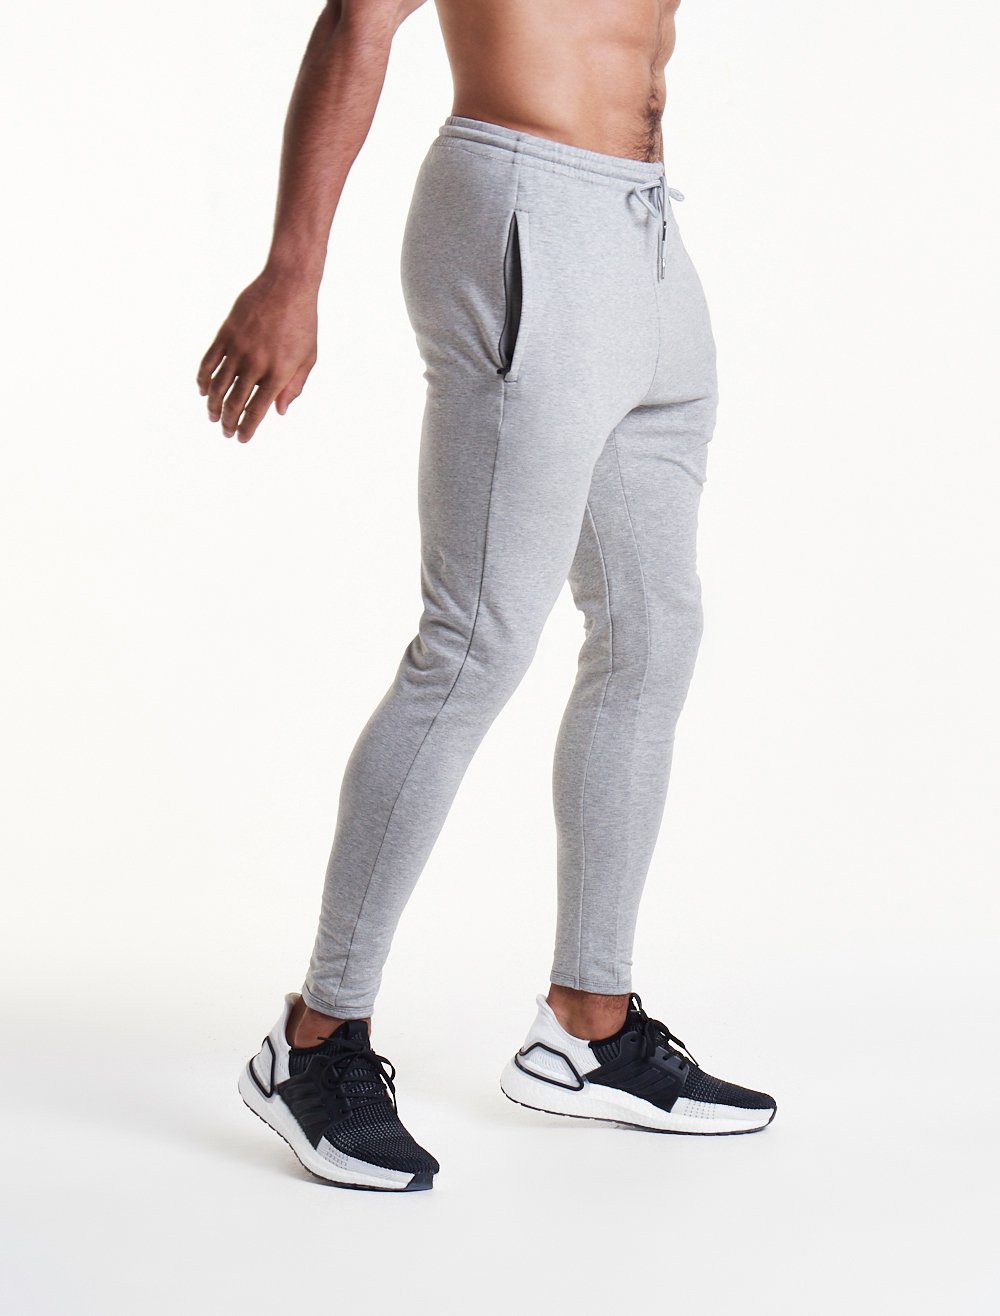 Pro-Fit Tapered Bottoms / Triple Grey Pursue Fitness 2